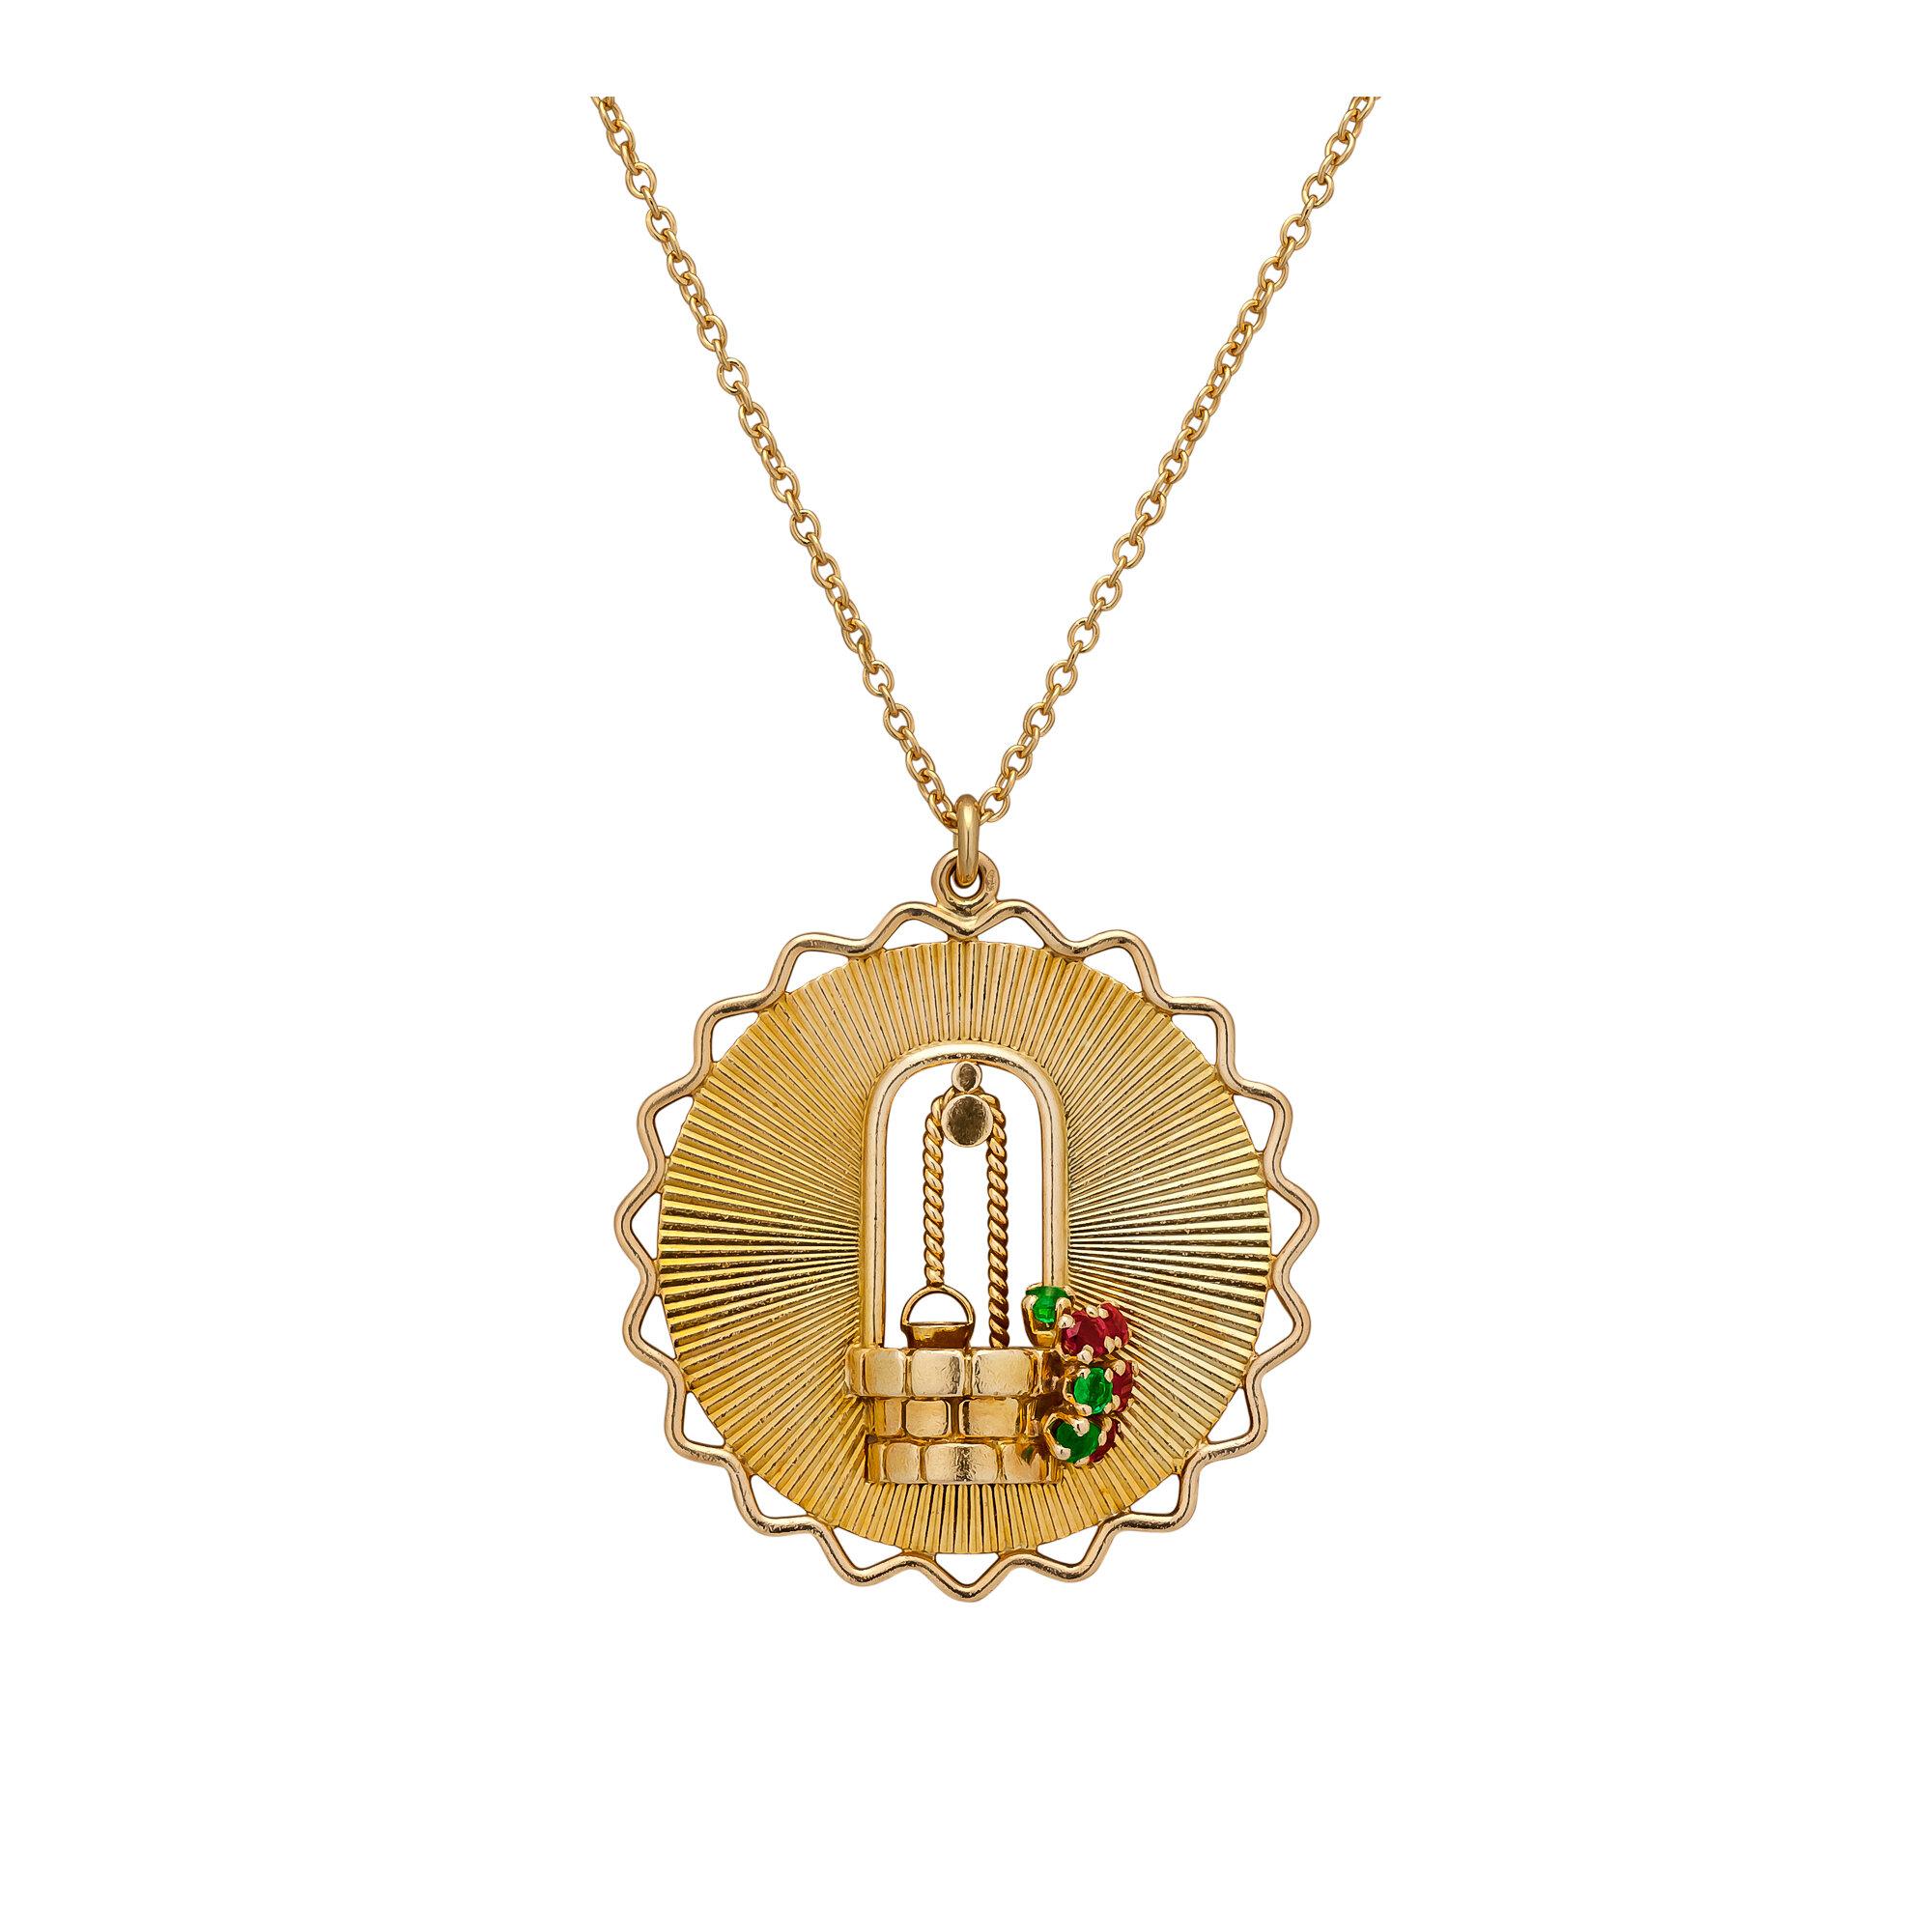 Make a wish wherever you go with this George L'Enfant Paris Tiffany & Co. vintage gold wishing well charm pendant necklace.  With a three dimensional wishing well blooming with ruby and emerald flowers, this sunny 18 karat yellow gold disc will make